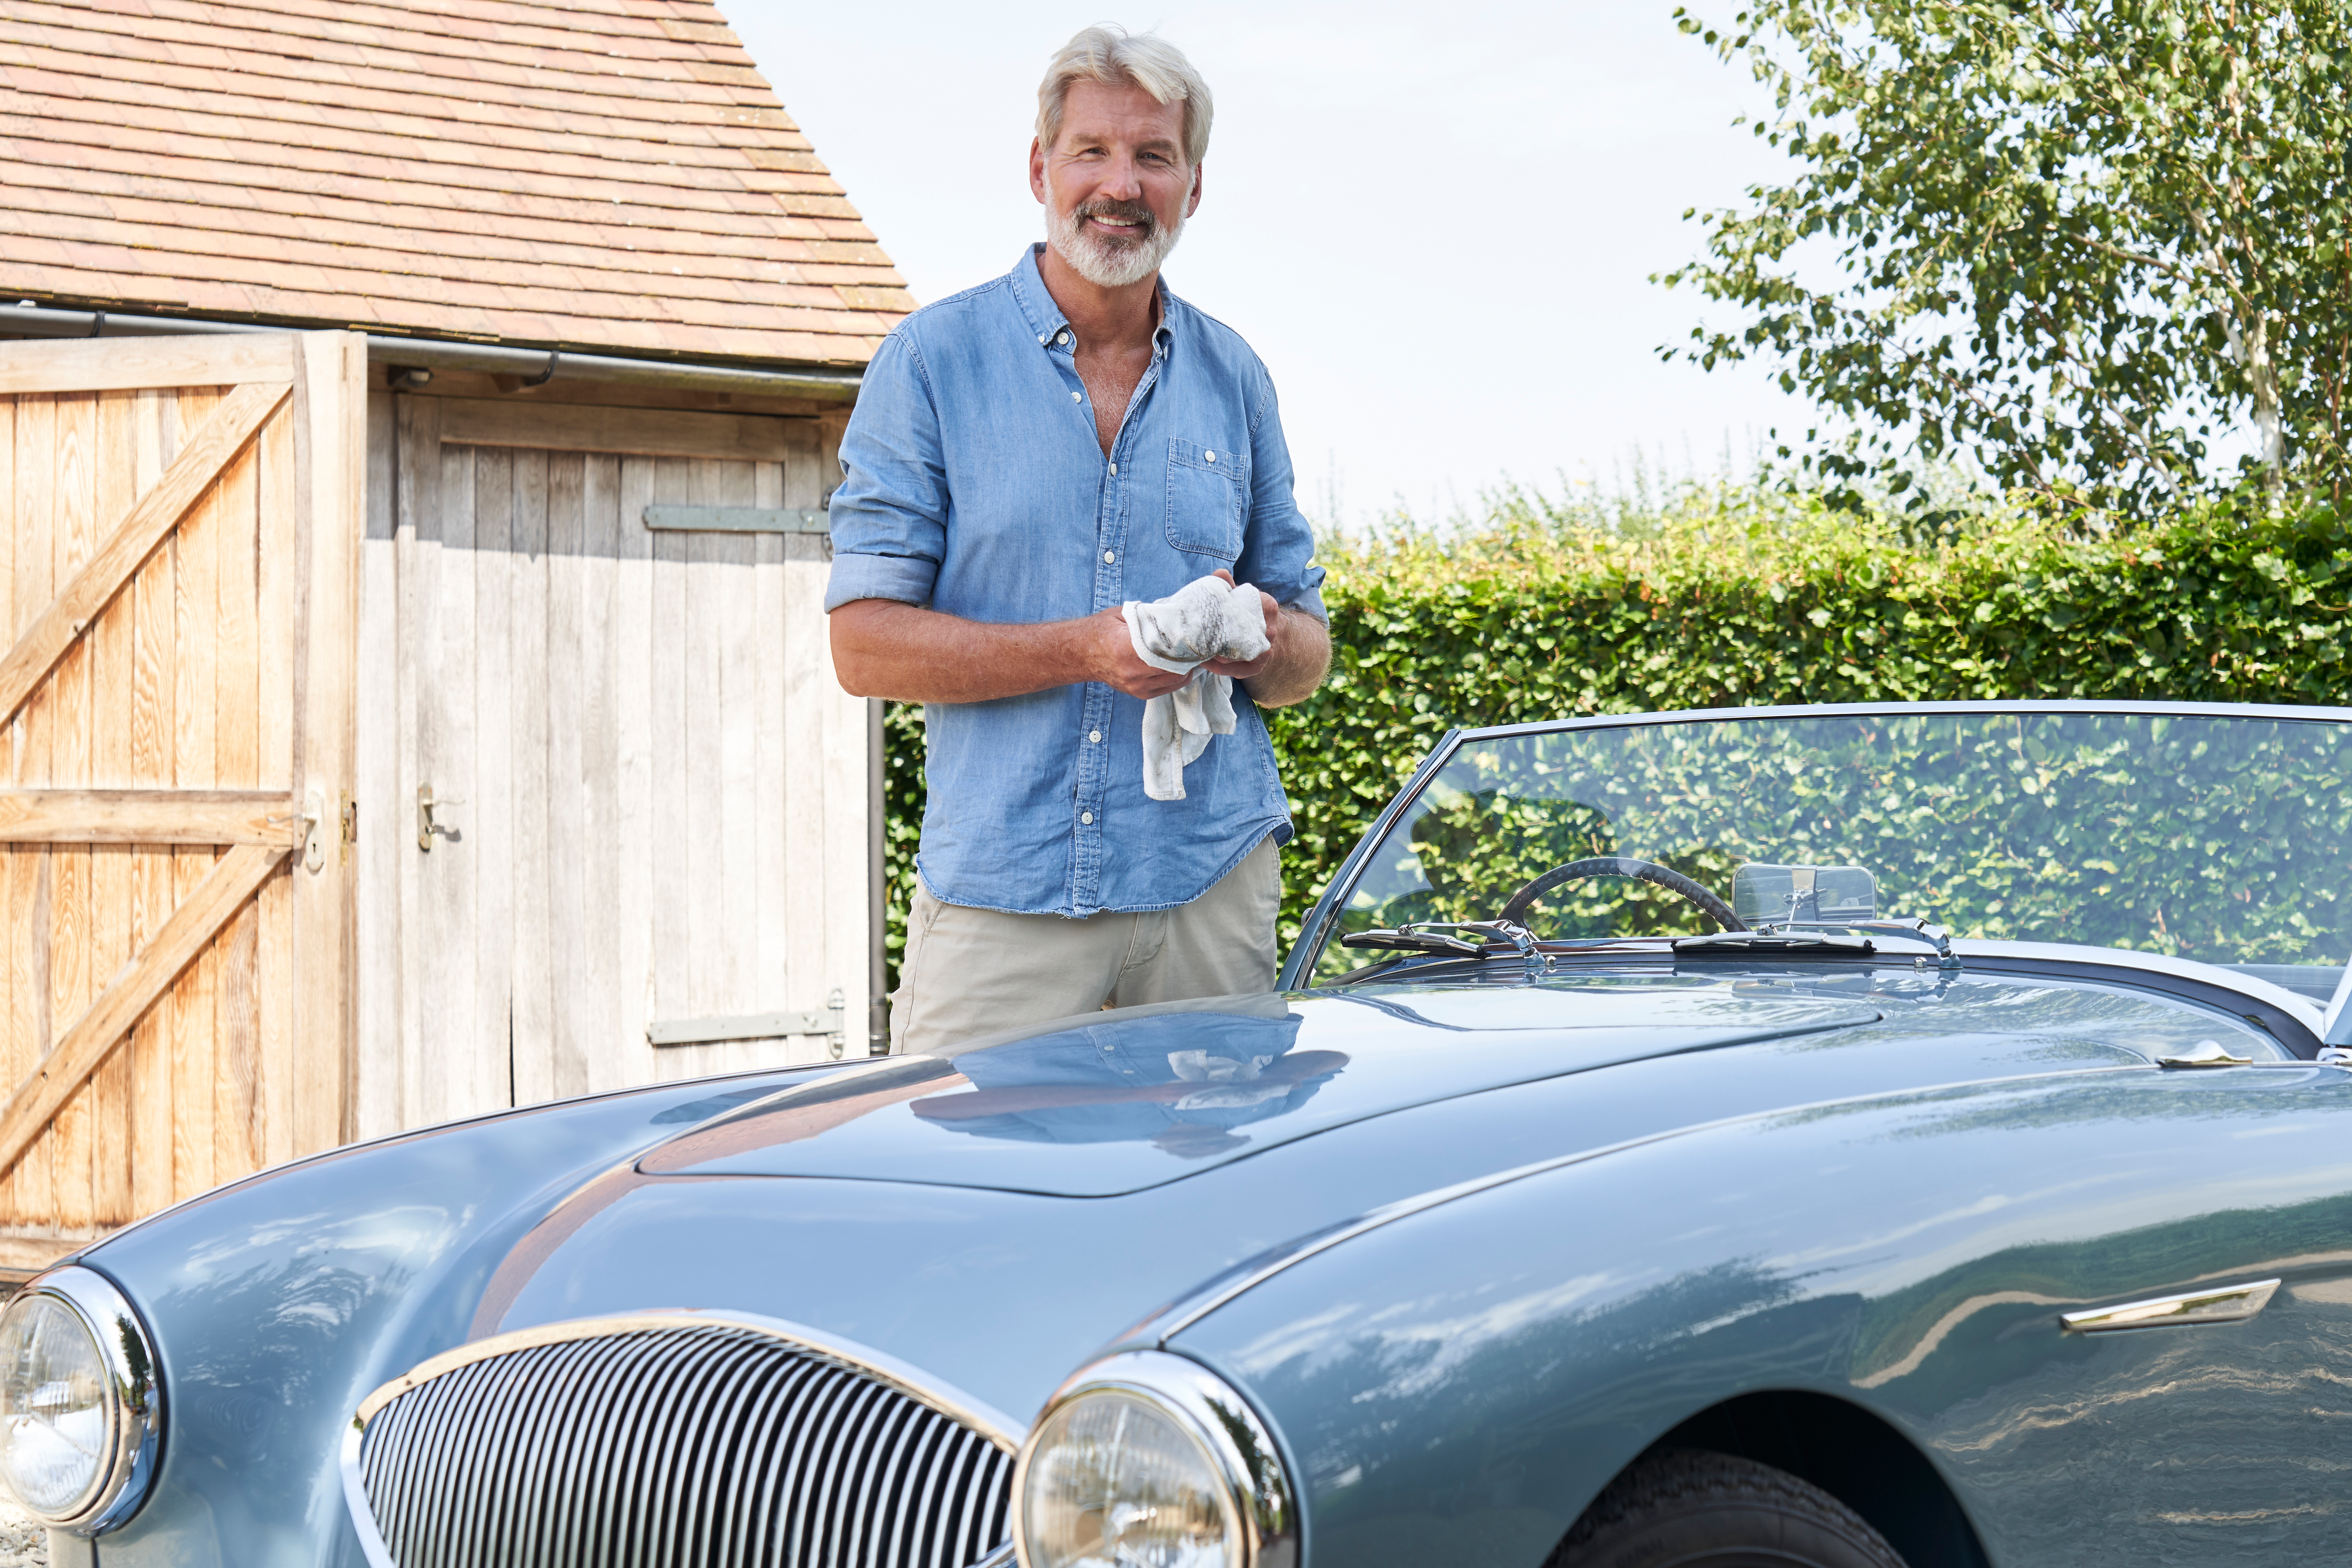 Owning a classic car is a big responsibility, and proper maintenance can help preserve your vintage beauty.